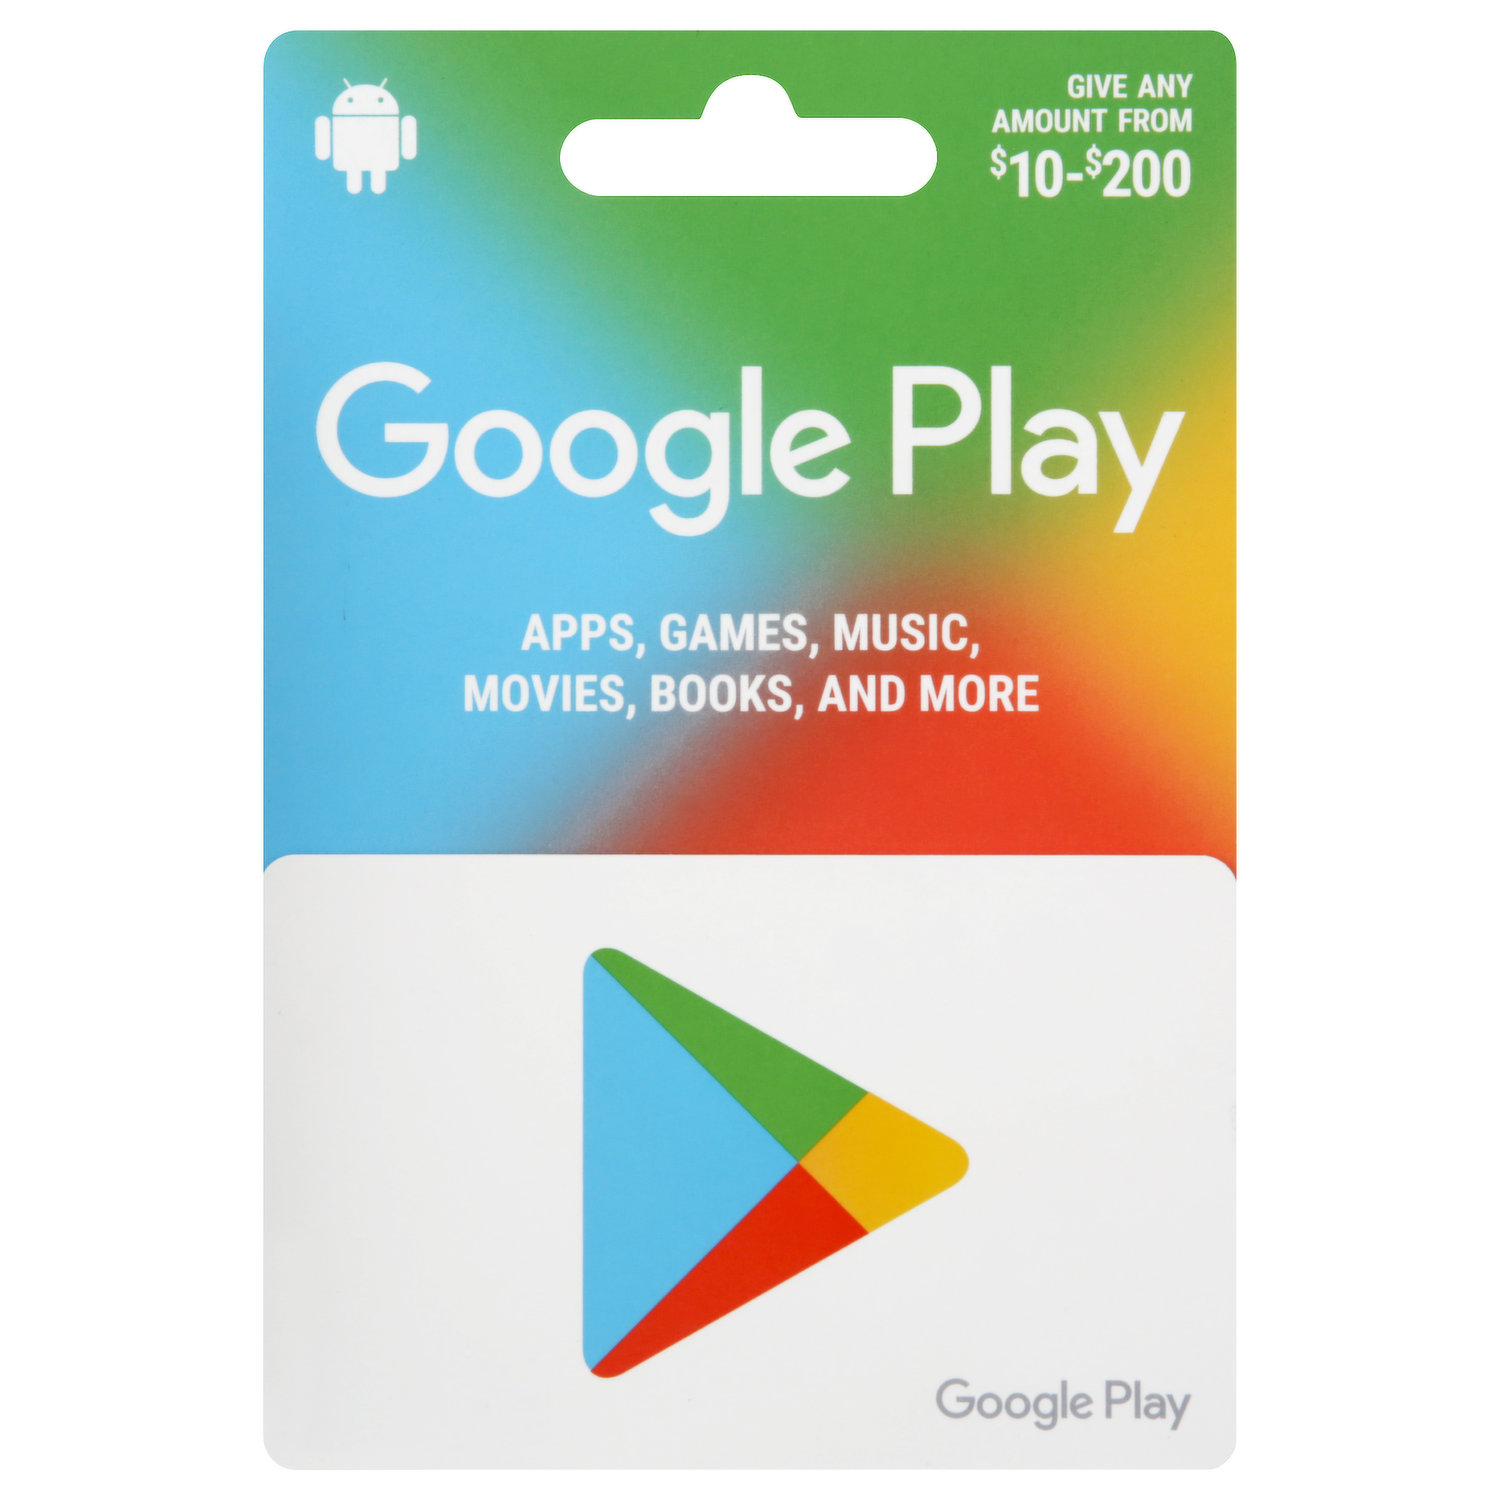 How to Buy Google Play Gift Cards Online? 